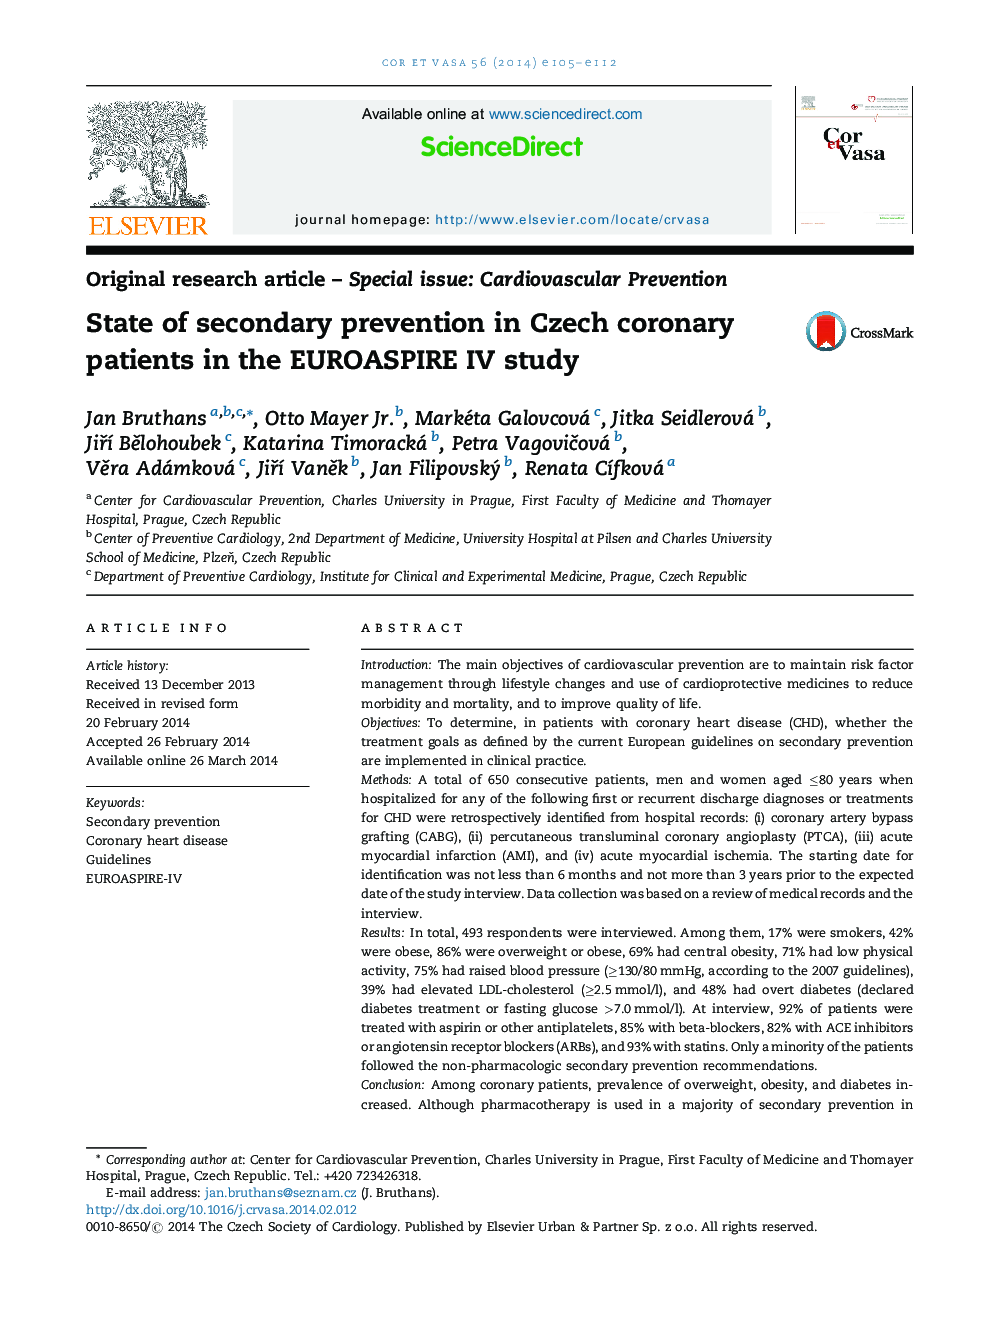 State of secondary prevention in Czech coronary patients in the EUROASPIRE IV study